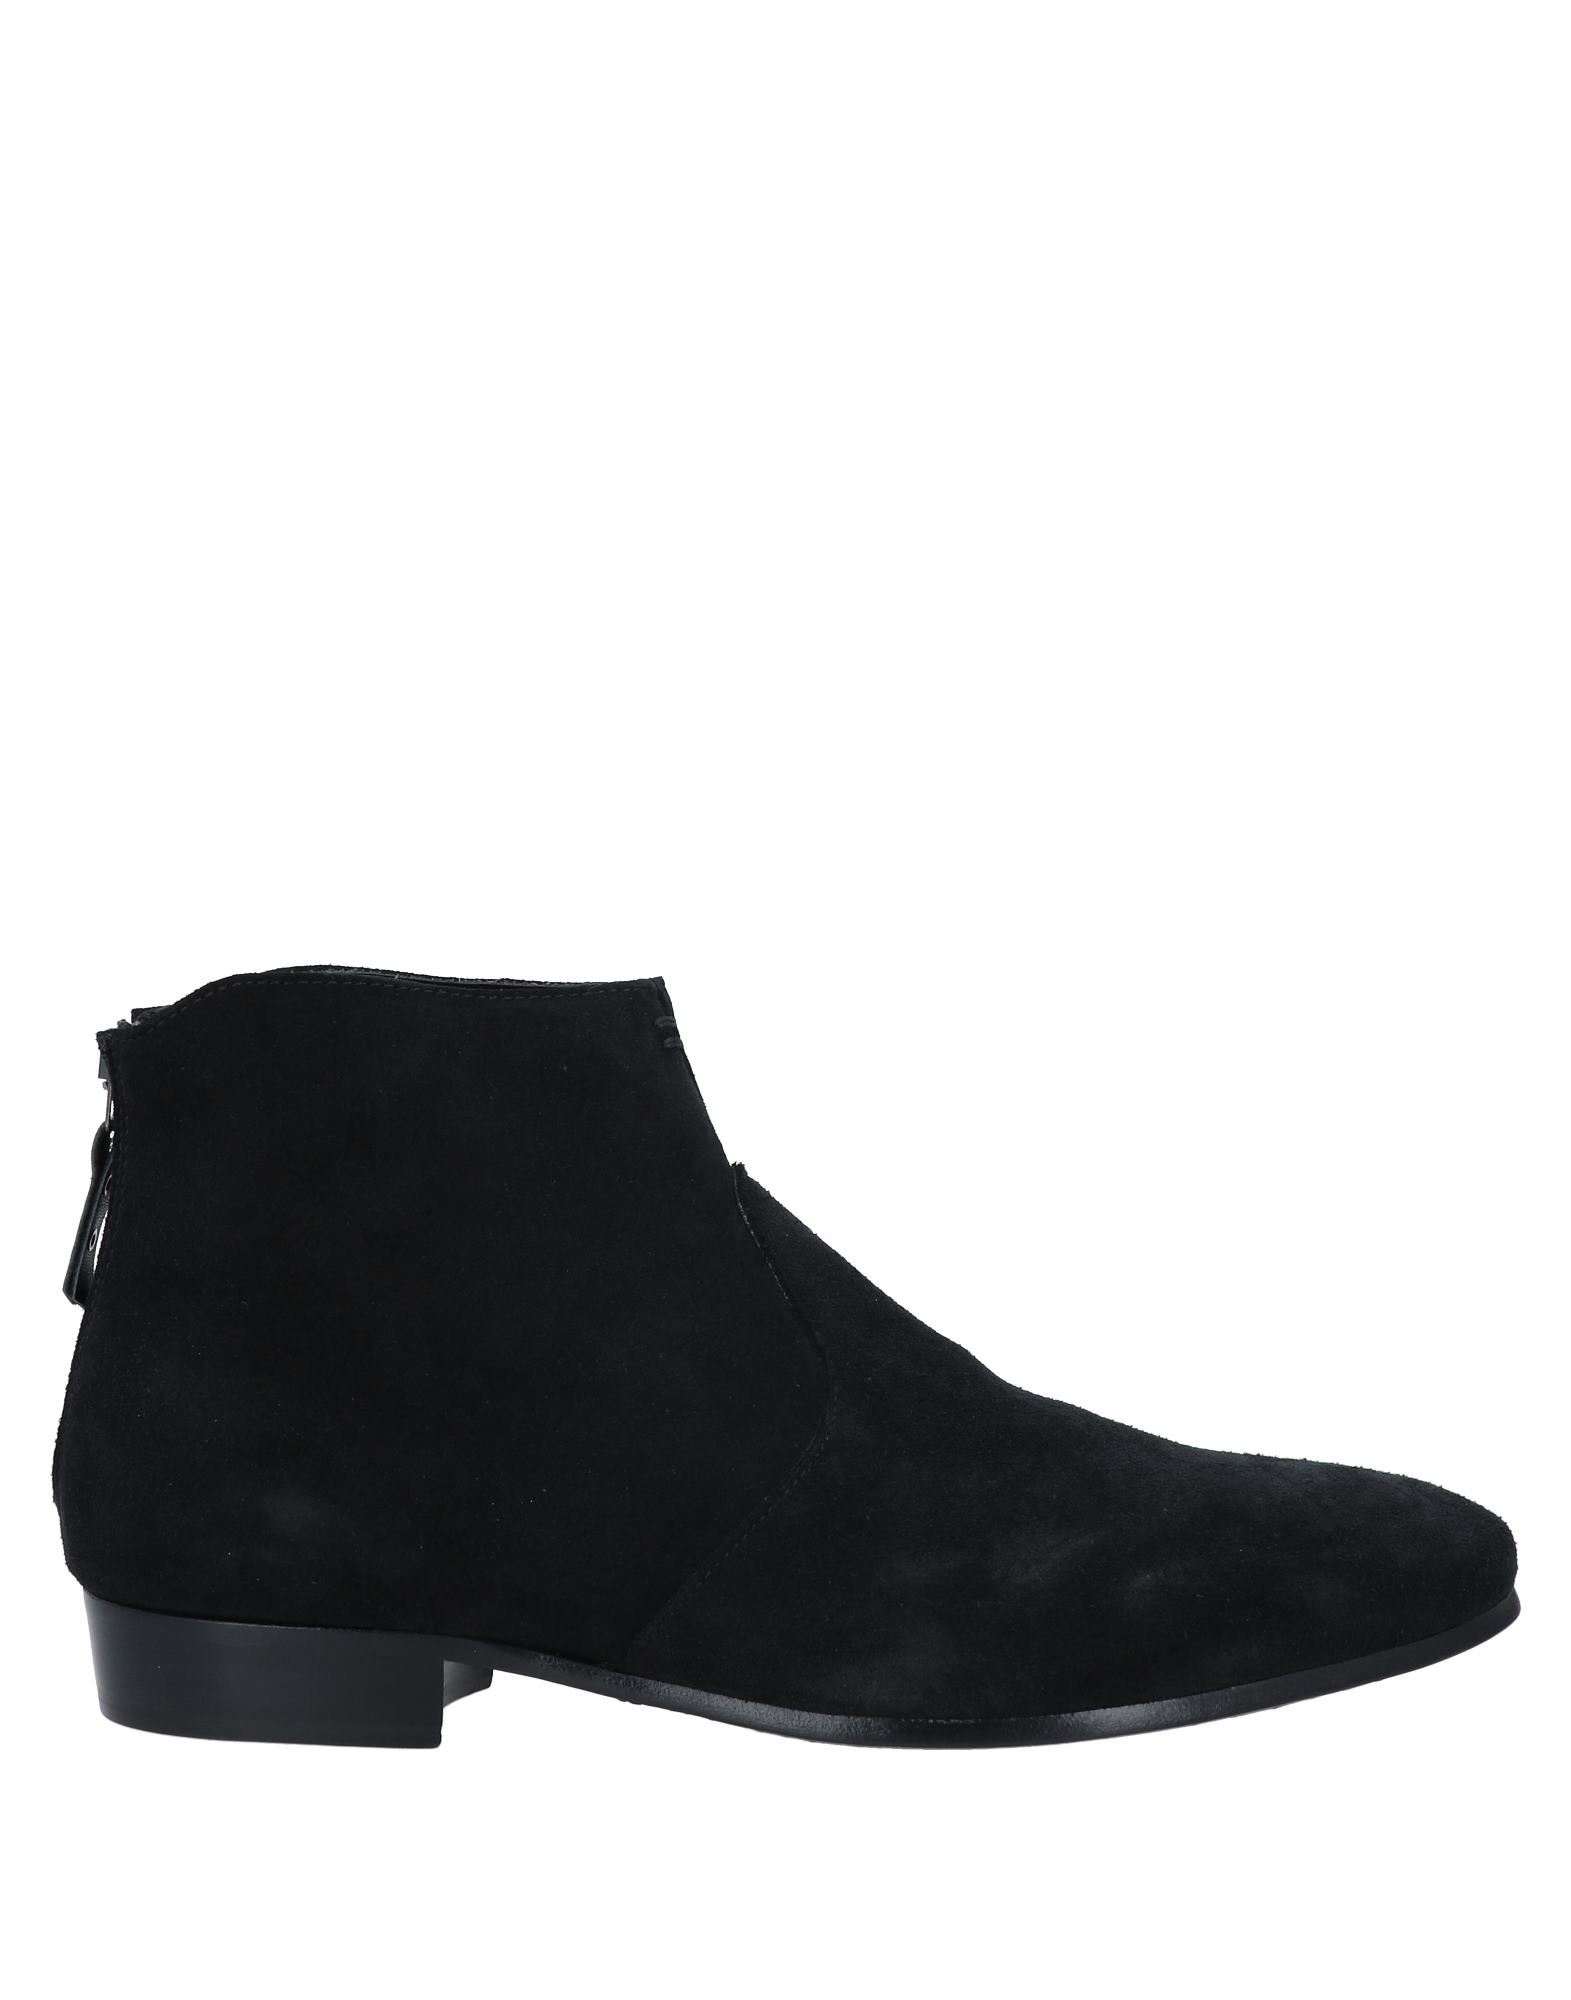 Unconventional Royal Ankle Boots In Black